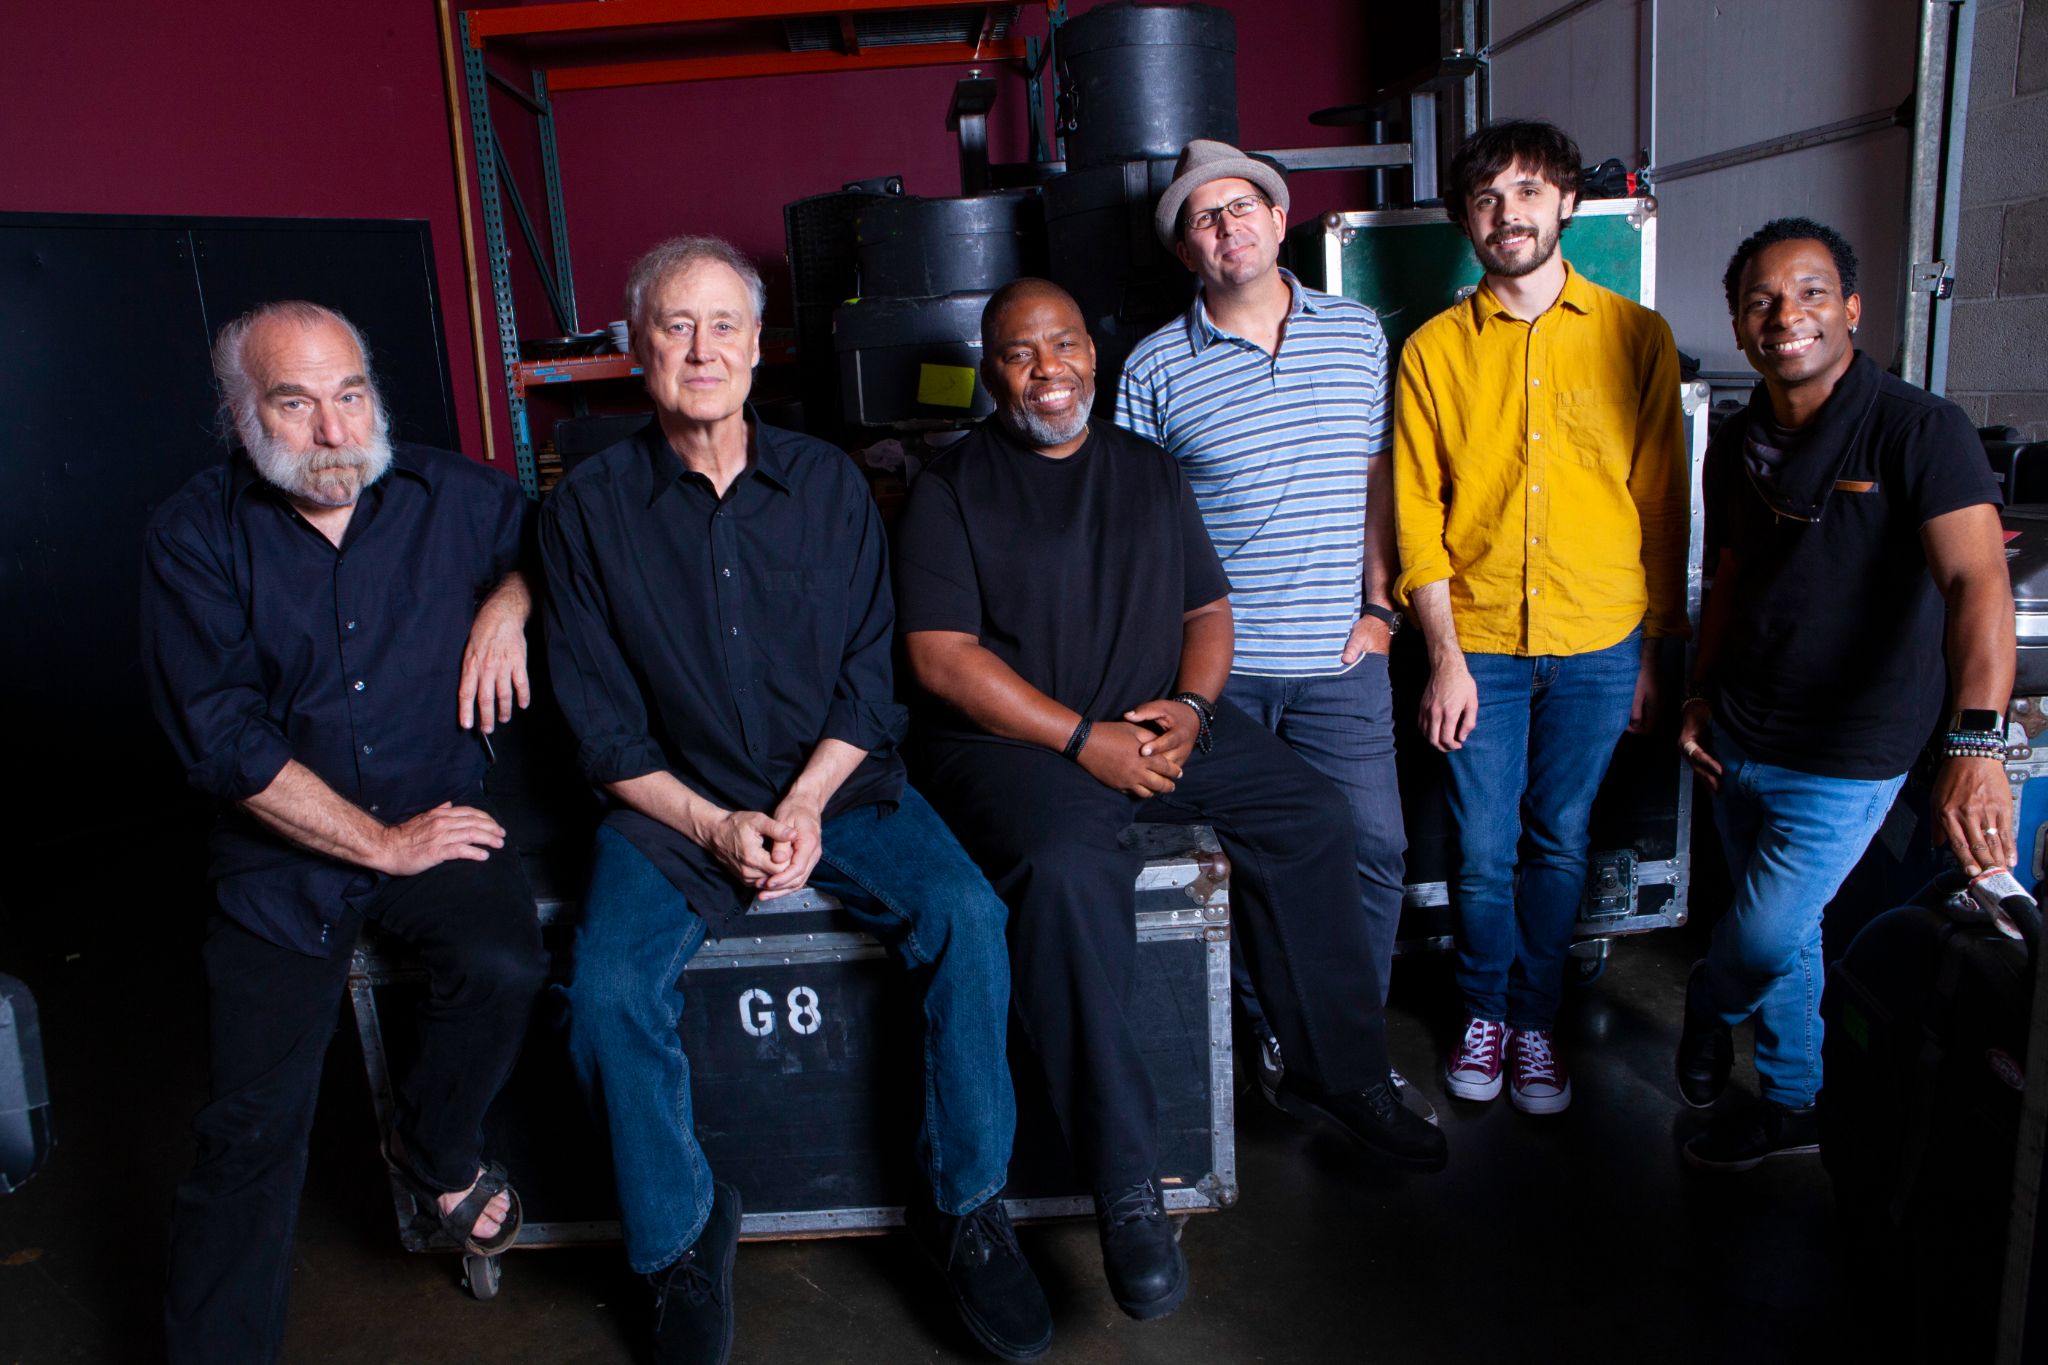 Z2 Entertainment & 97.3 KBCO Proudly Present Bruce Hornsby & The Noisemakers on the Spirit Trail: 25th Anniversary Tour